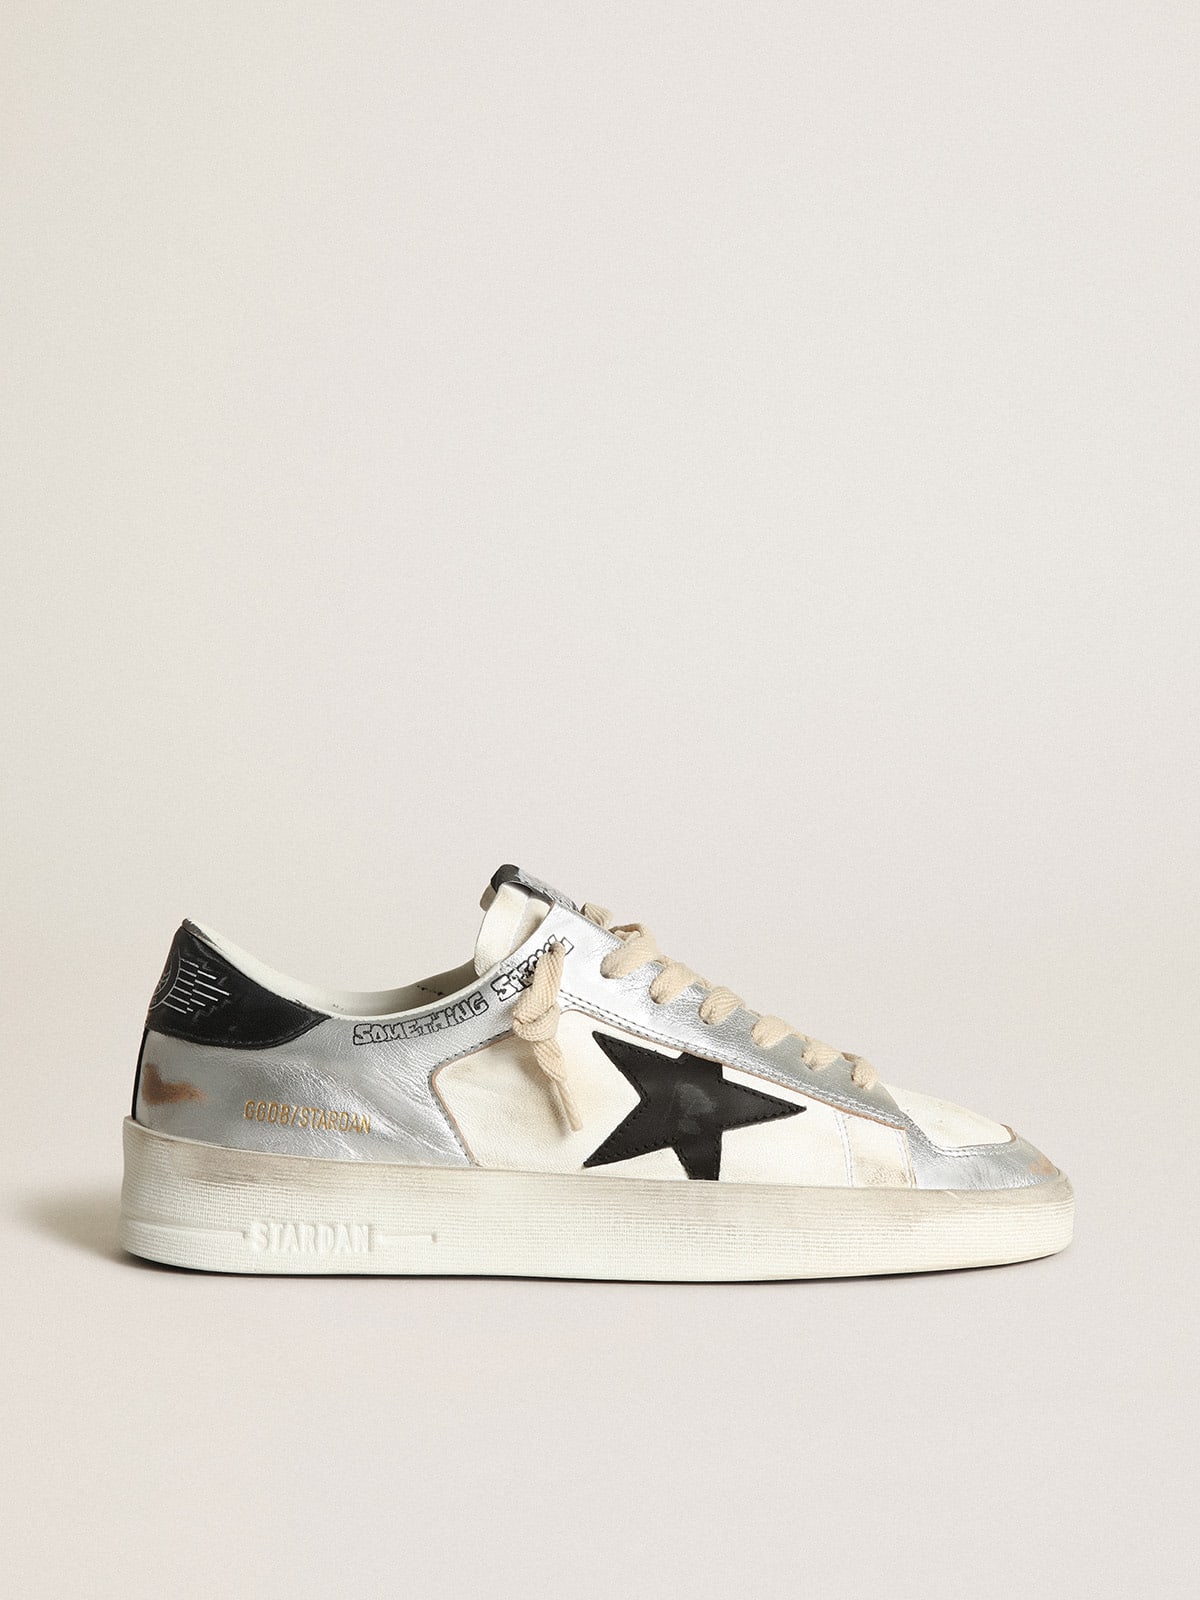 Men's Stardan sneakers in silver metallic leather with white nappa leather inserts and black leather star